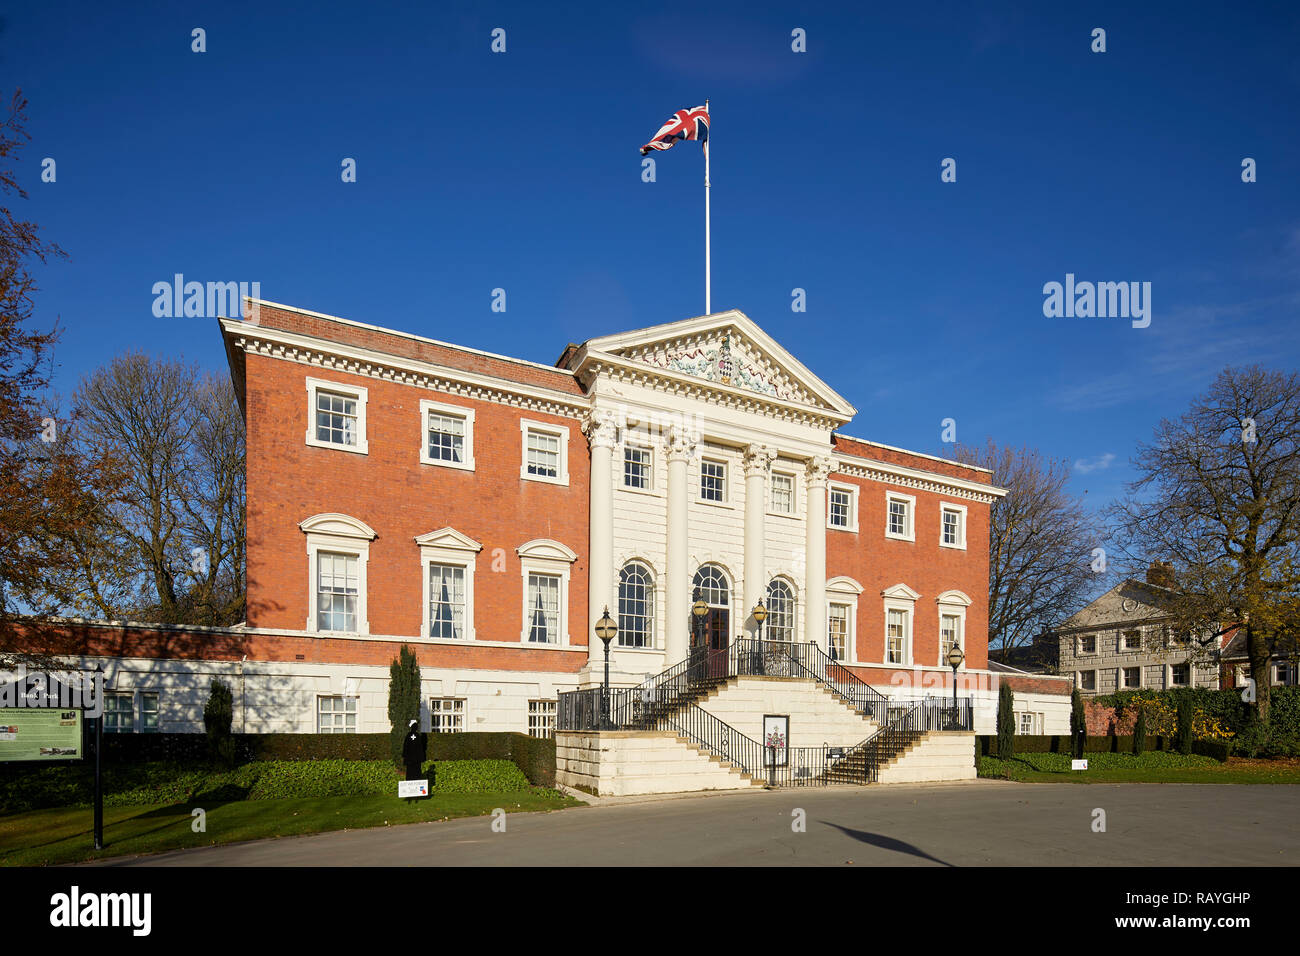 former house palladian style Warrington Town Hall, Cheshire, England originally called Bank Hall Grade I listed building by architect James Gibbs Stock Photo